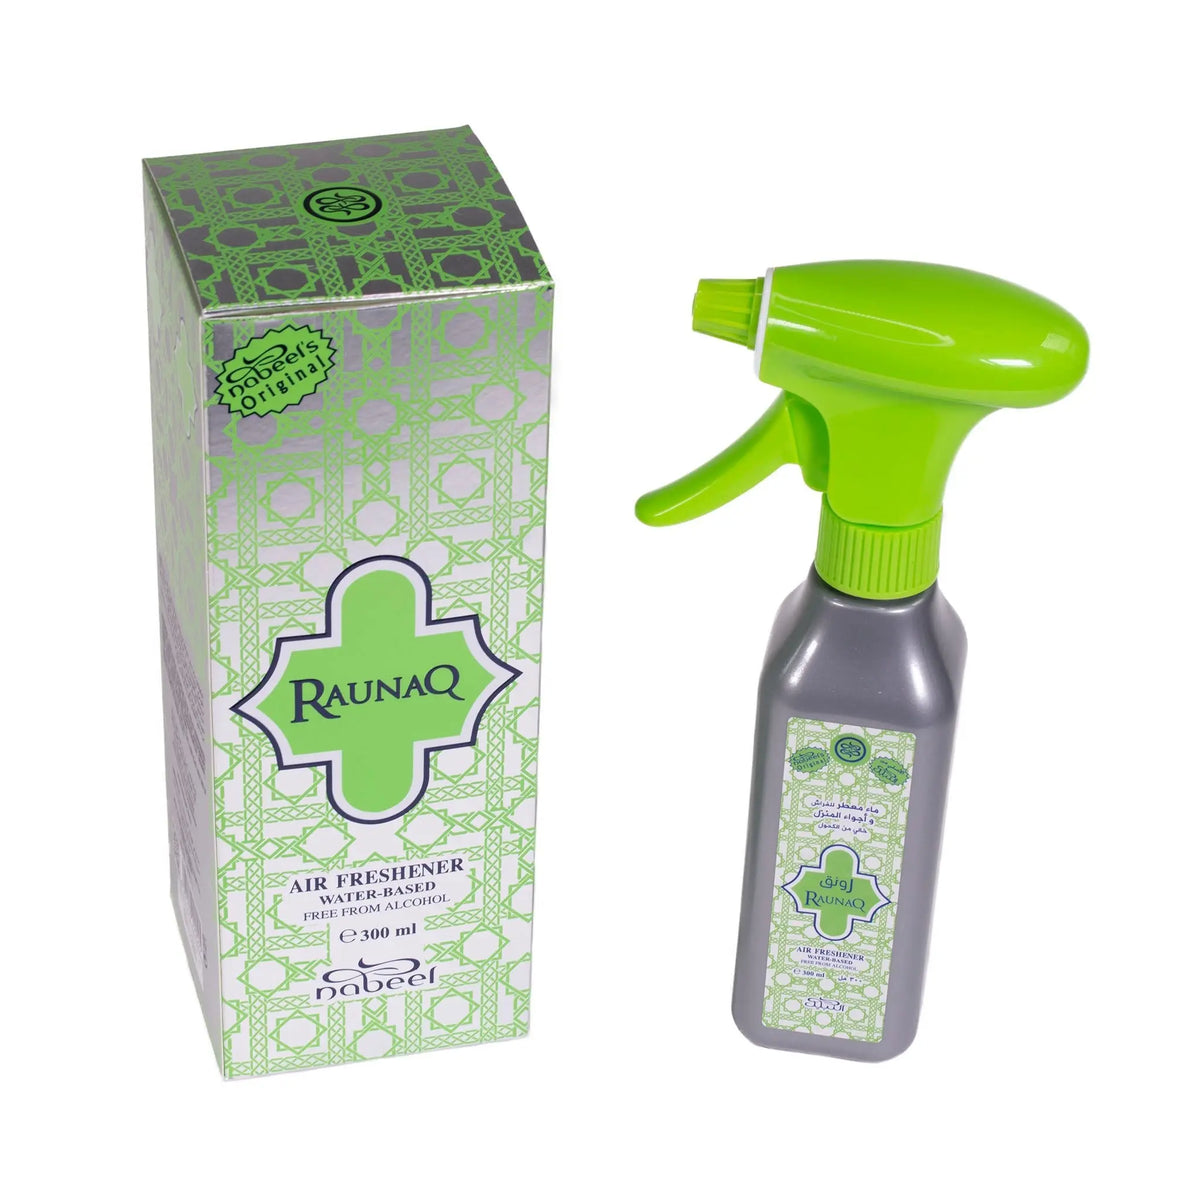 The image showcases a product set of "Raunaq" air freshener, consisting of a box and a spray bottle. The box is light green with a geometric pattern and features a prominent central label with the name "Raunaq" in a stylized font. Adjacent to the box is the spray bottle with a translucent gray body and a bright green spray head and nozzle. The bottle label matches the design of the box, including the brand and product name.